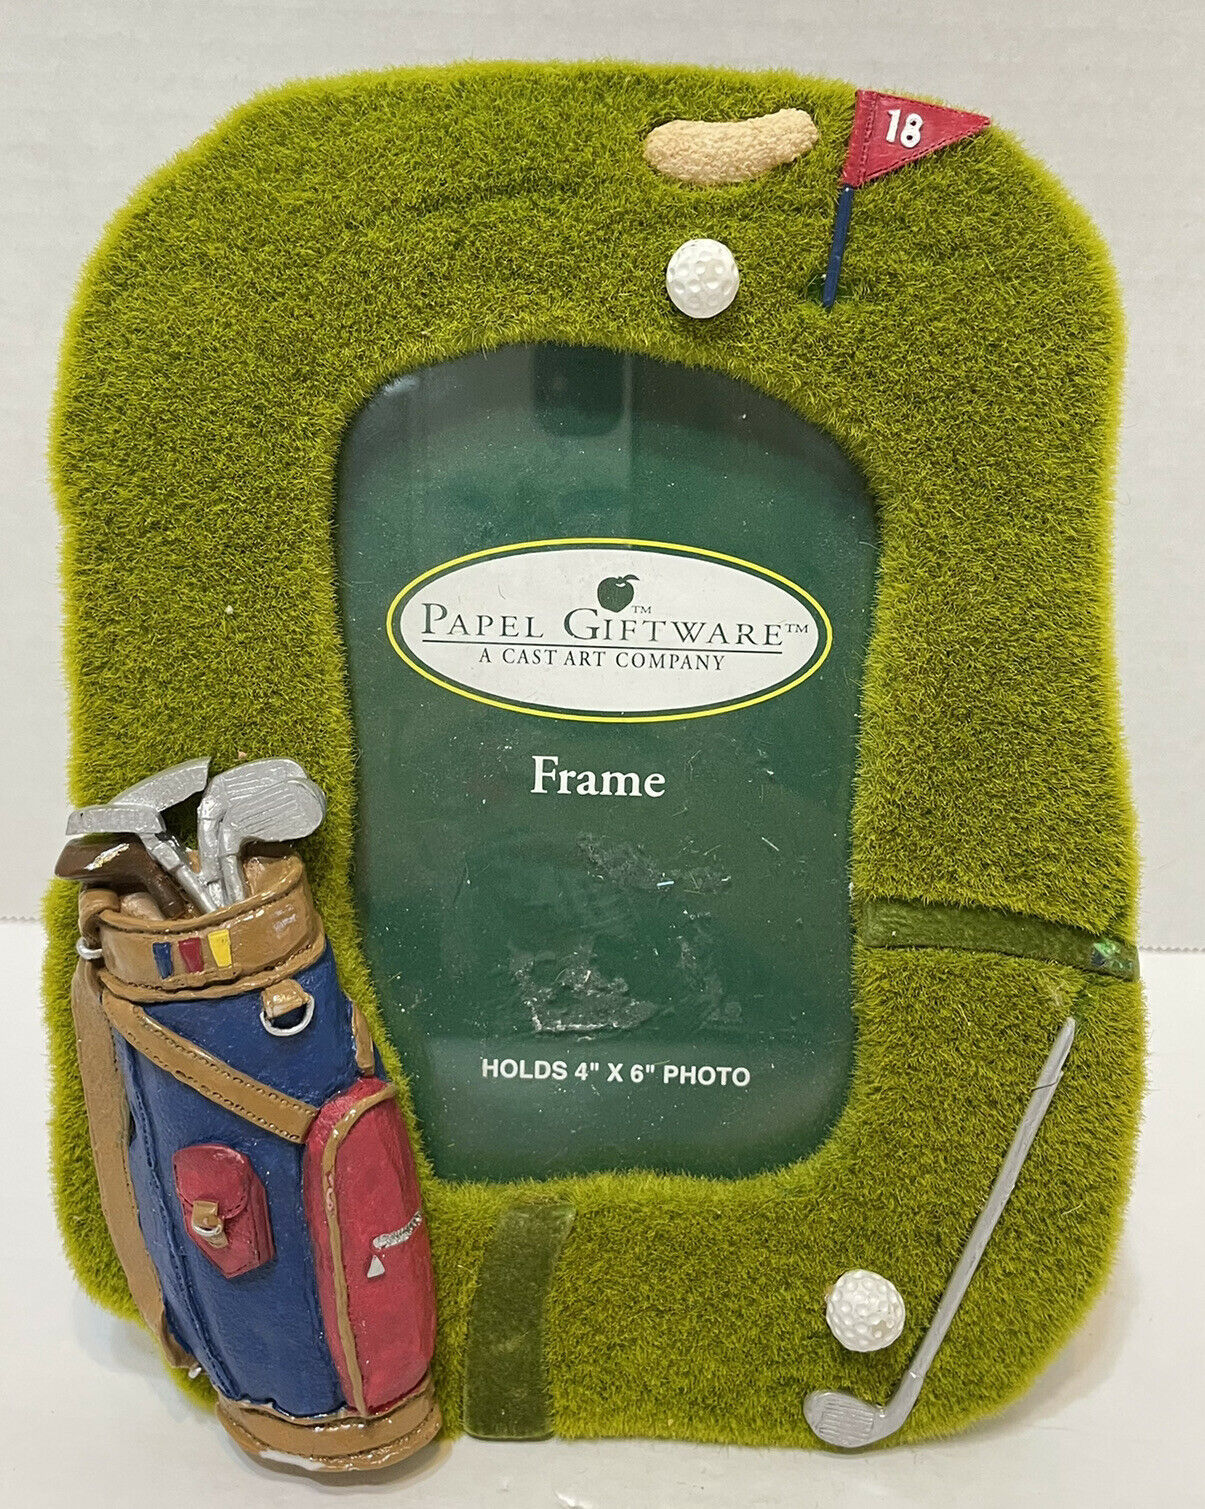 Papel Giftware 3D Golf Frame Decorated Turf for 4 x 6" Photo Free Standing - $9.37